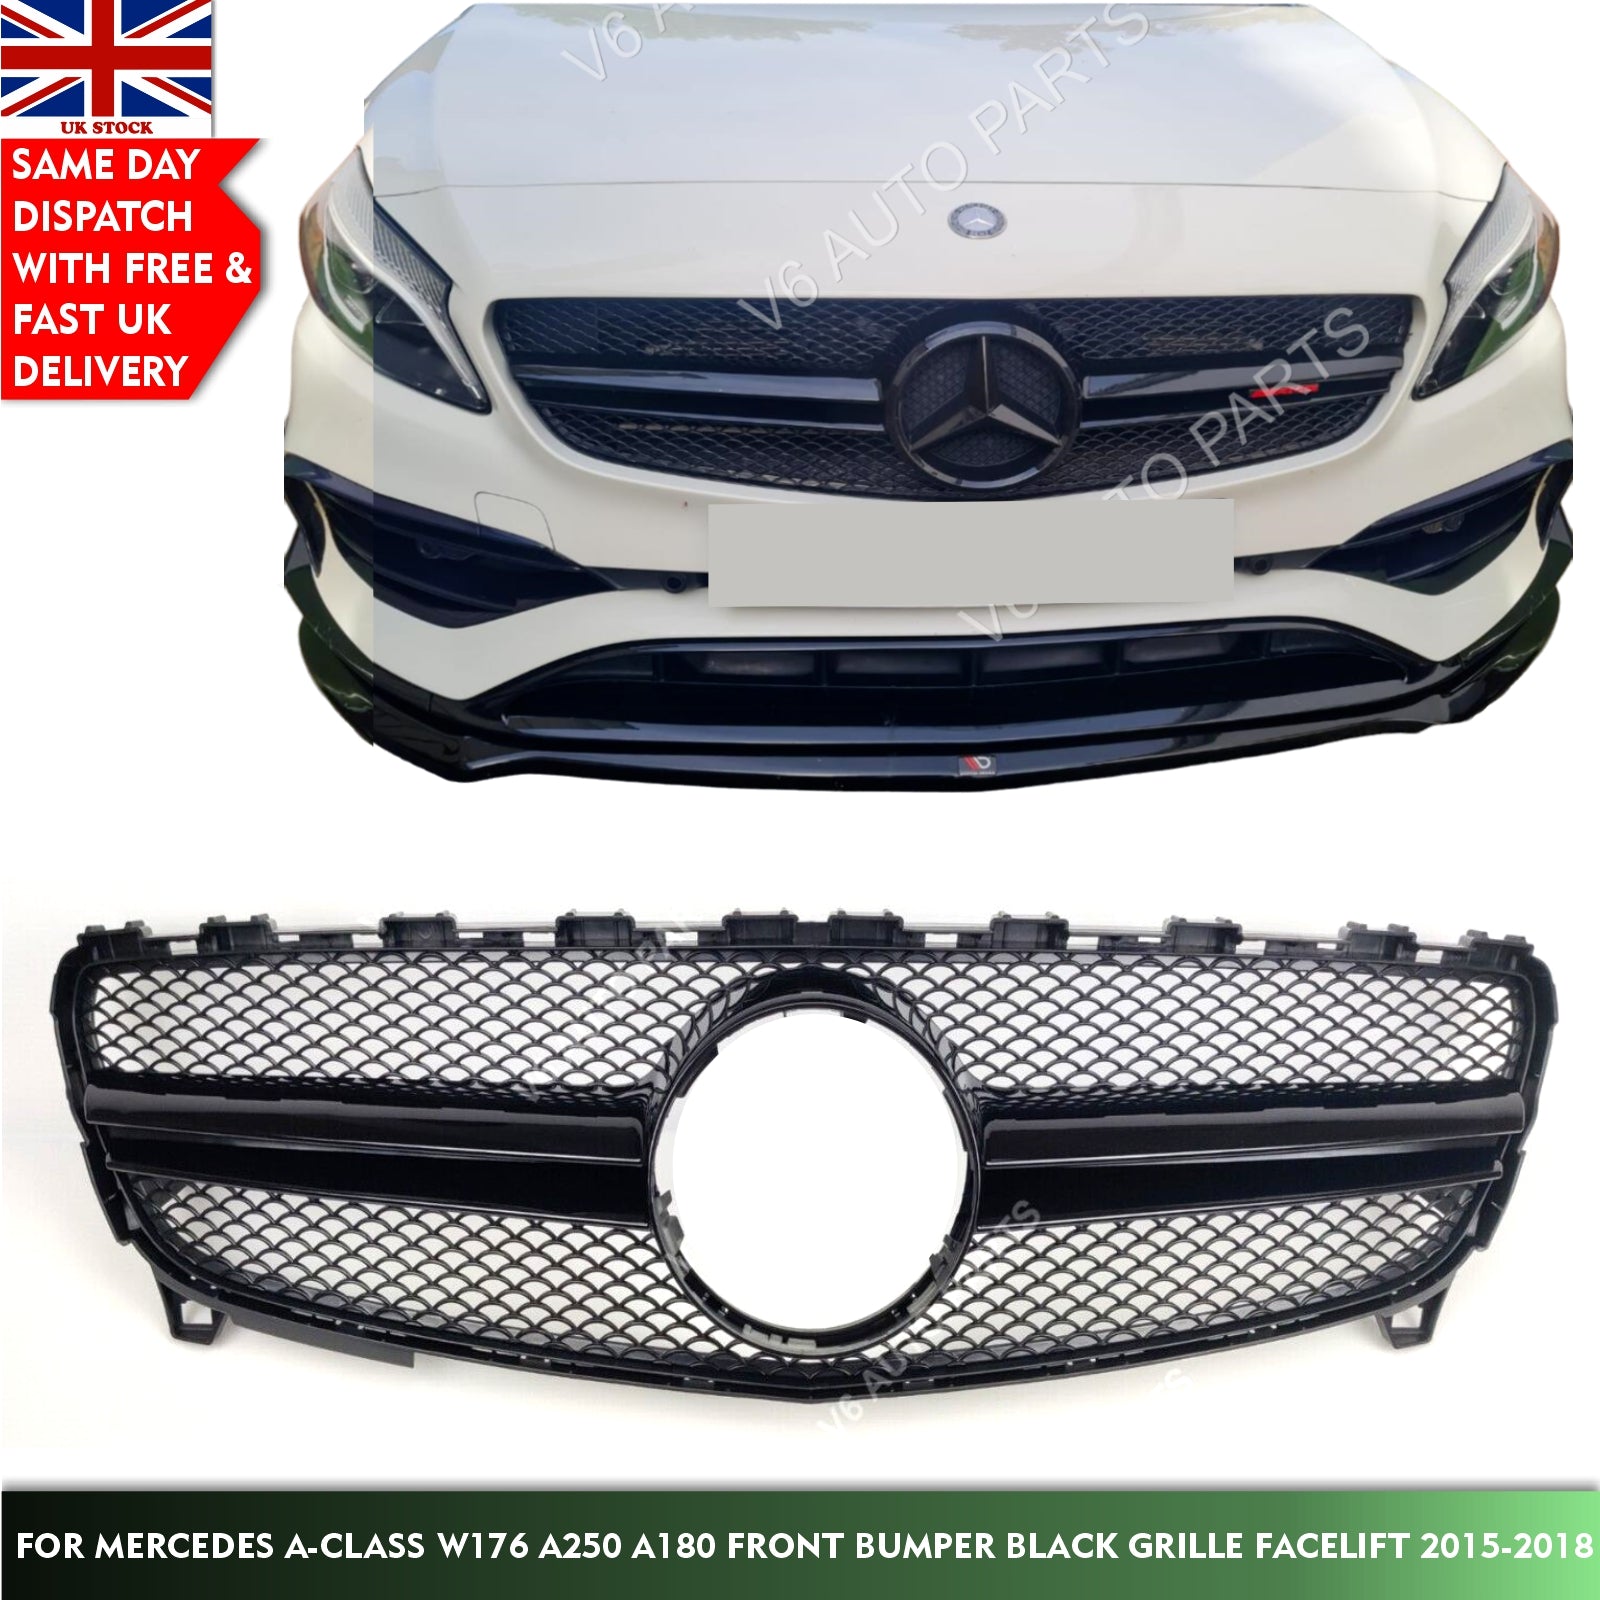 For Mercedes A-Class W176 A160 A180 Grill A250 Front Radiator Grille 2015 - 2018